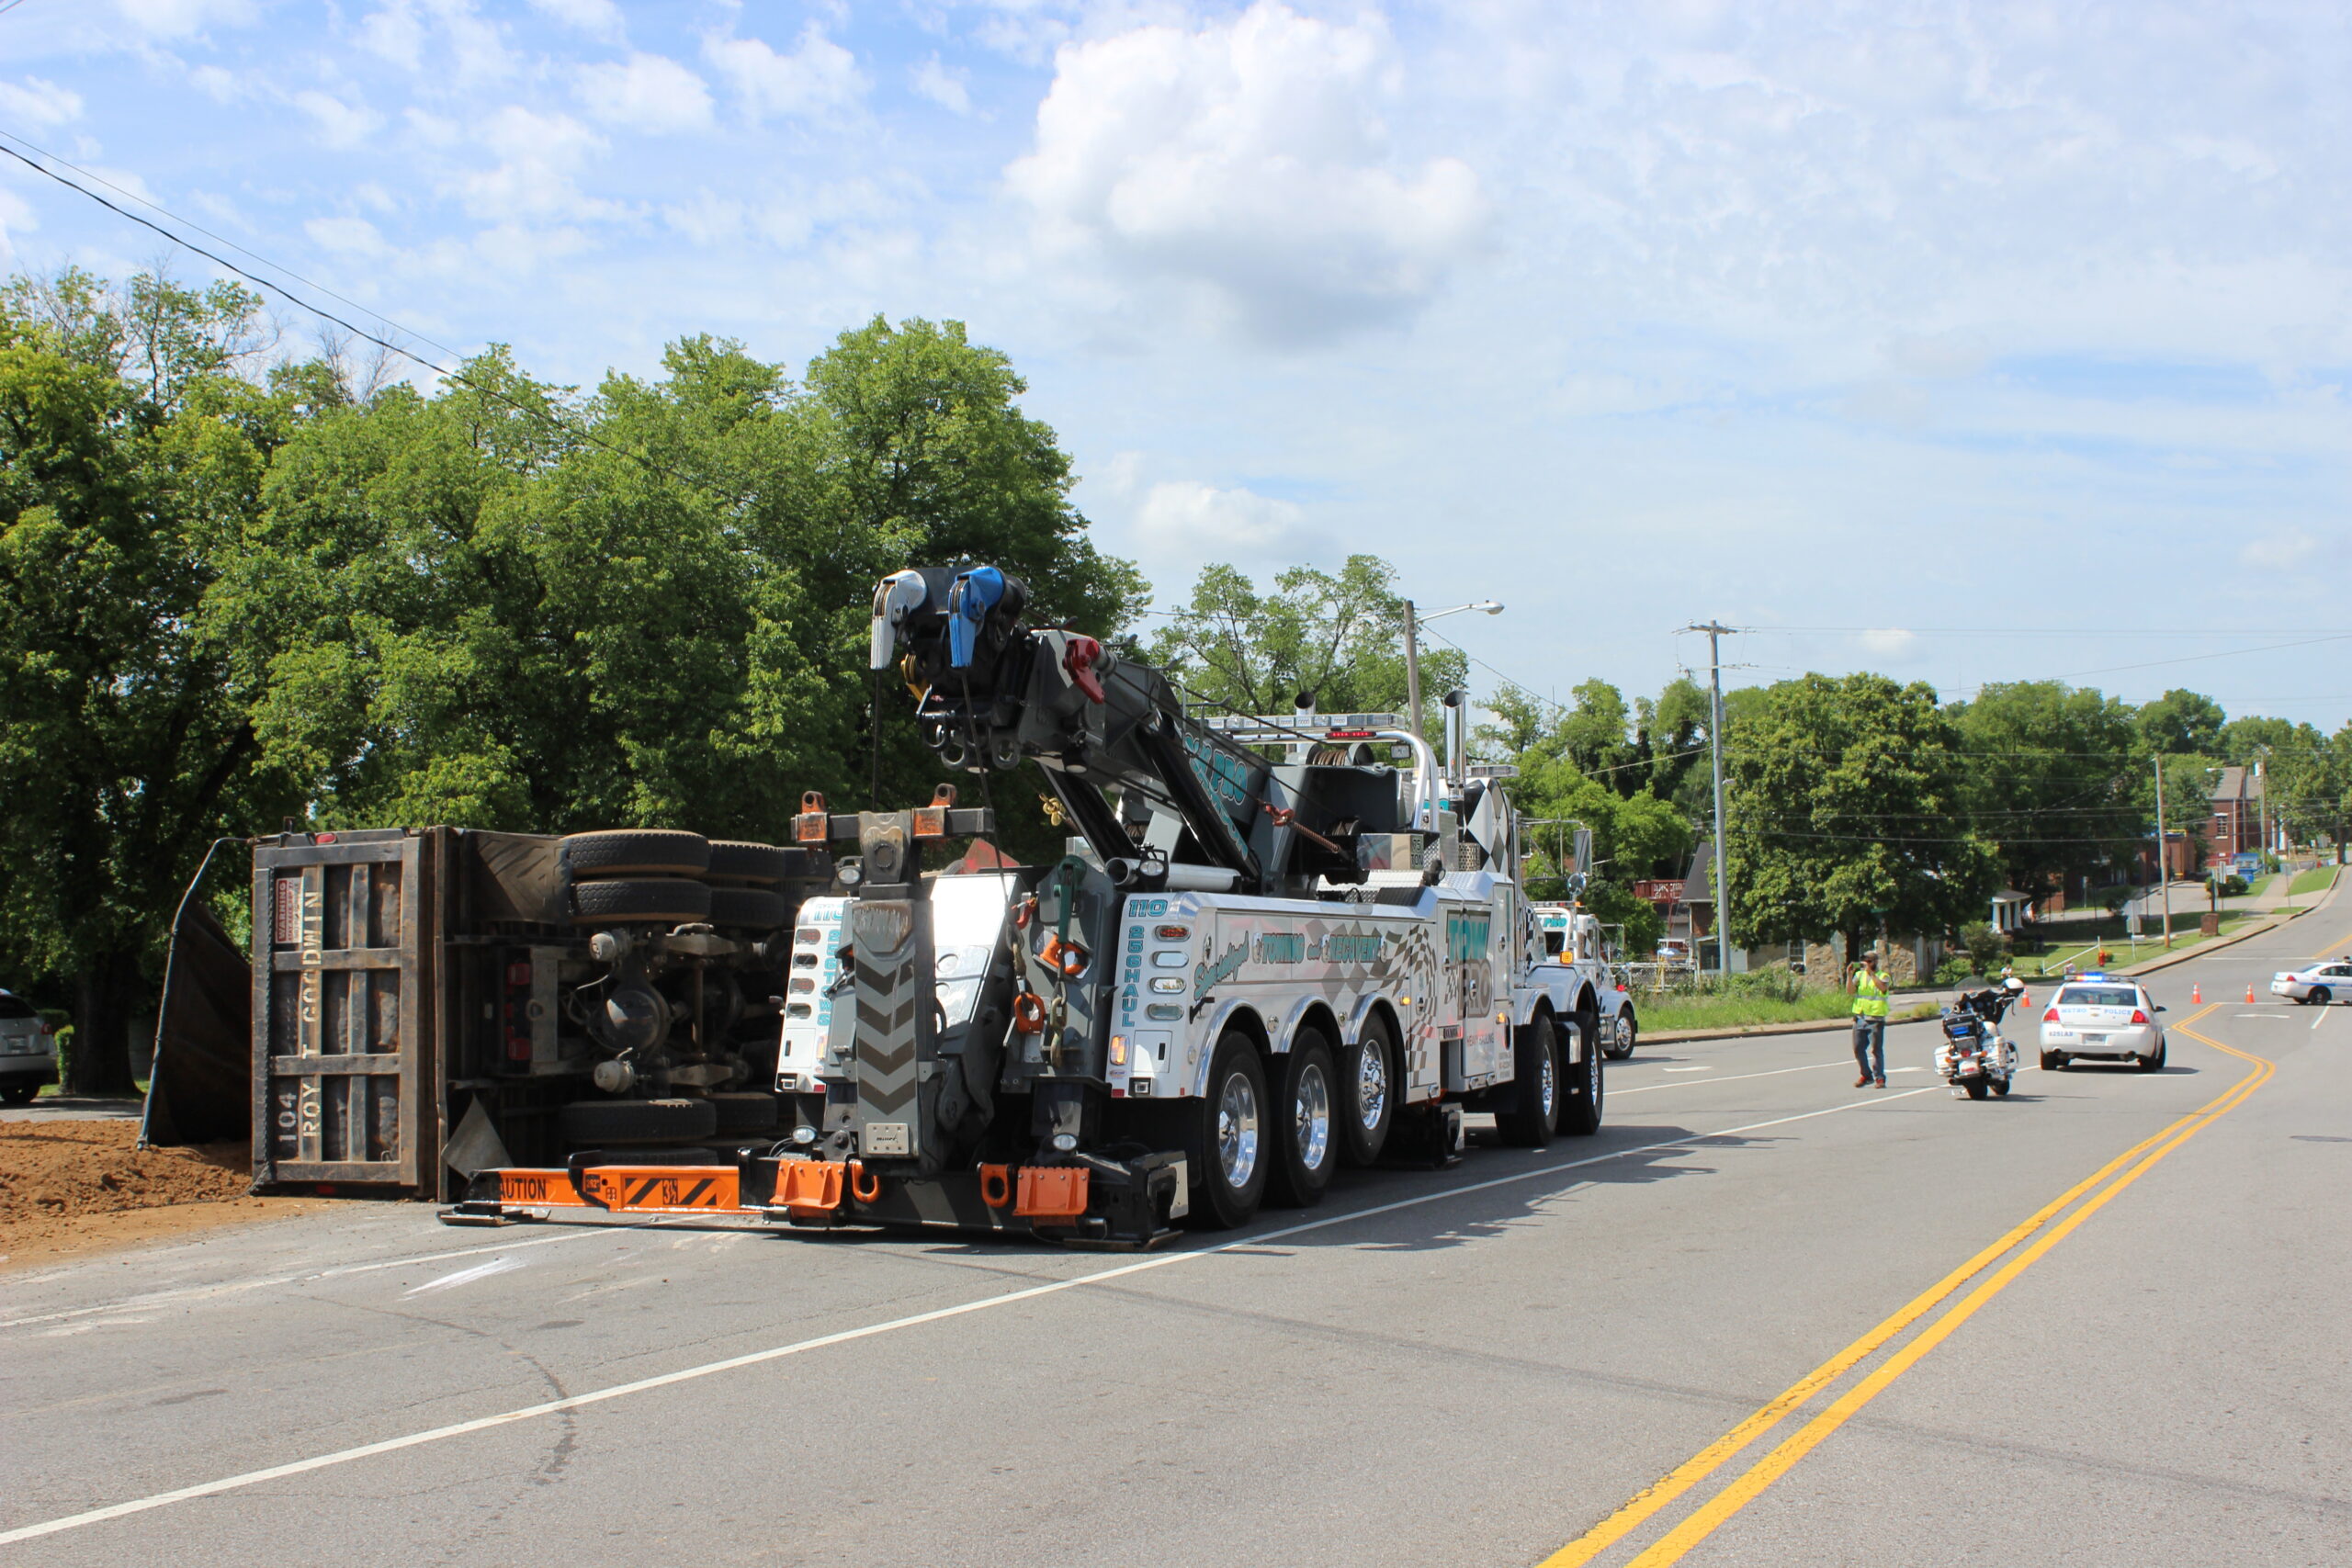 A tow pro truck on the side of the road with the road closed down by police officers. Off the road is an over turned garbage truck that needs to be recovered.